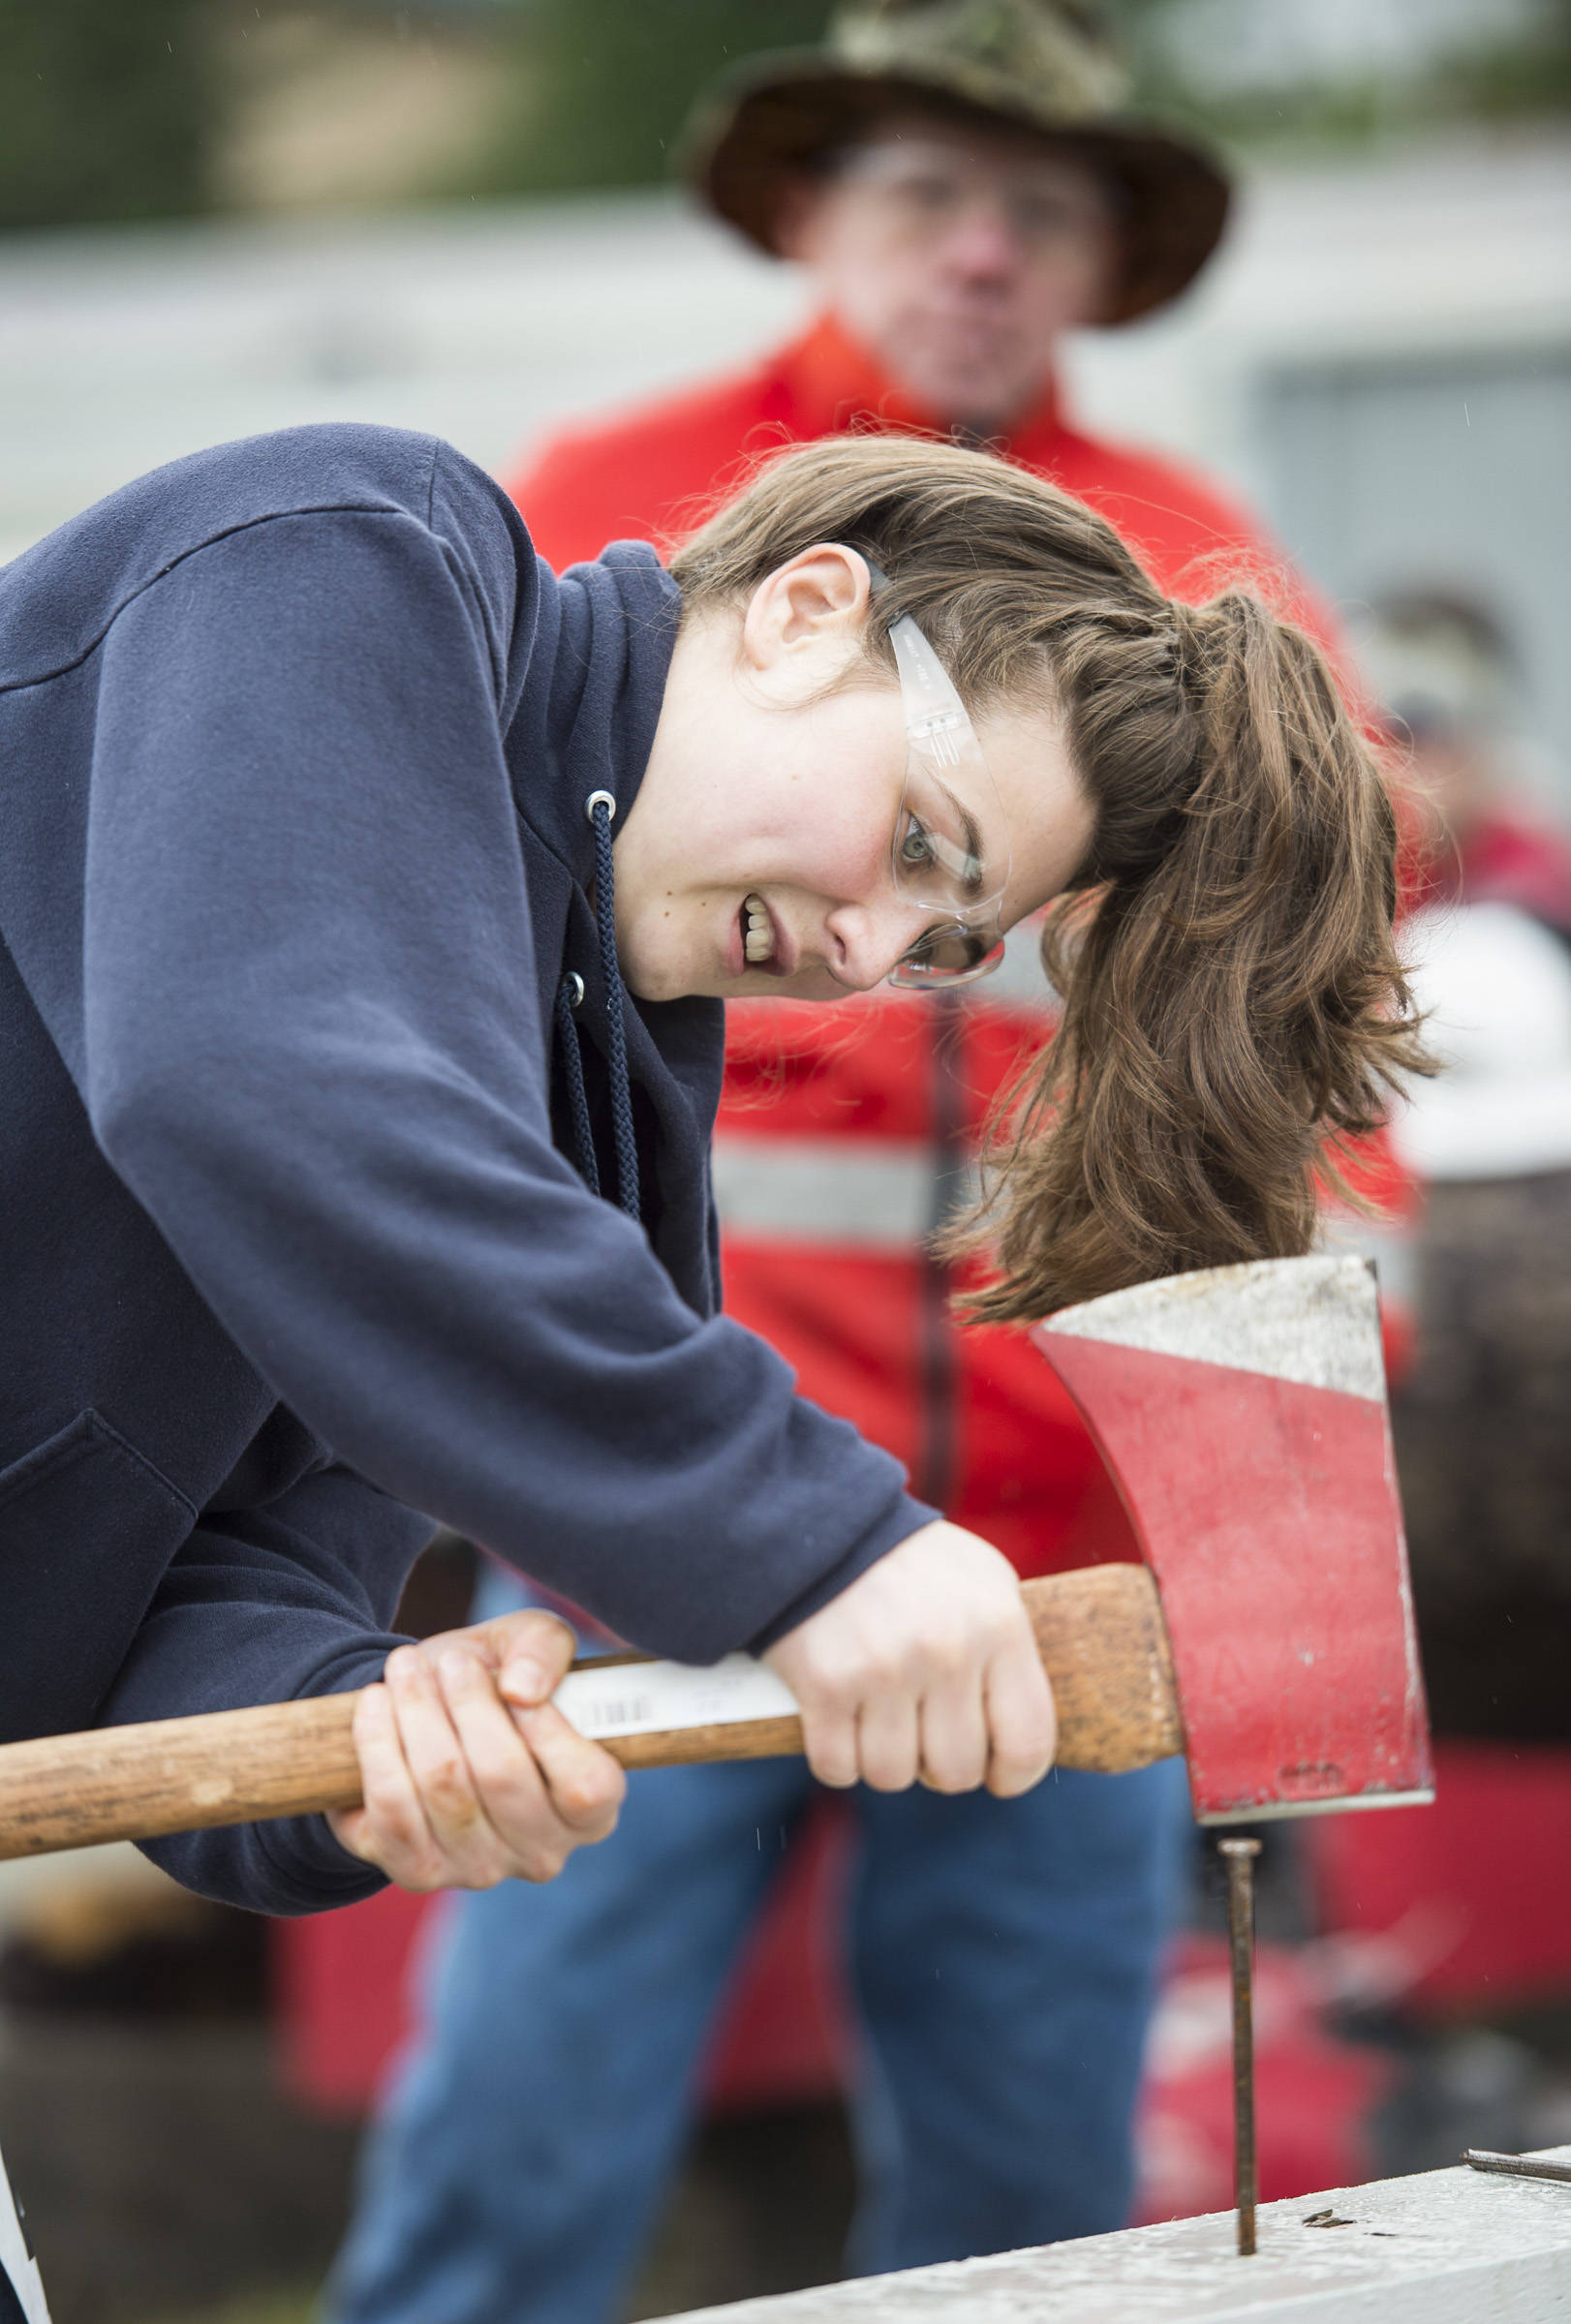 Abigail Hoy competes in the women’s spike driving contest during the 27th annual Juneau Gold Rush Days at Savikko Park. (Michael Penn | Juneau Empire File)